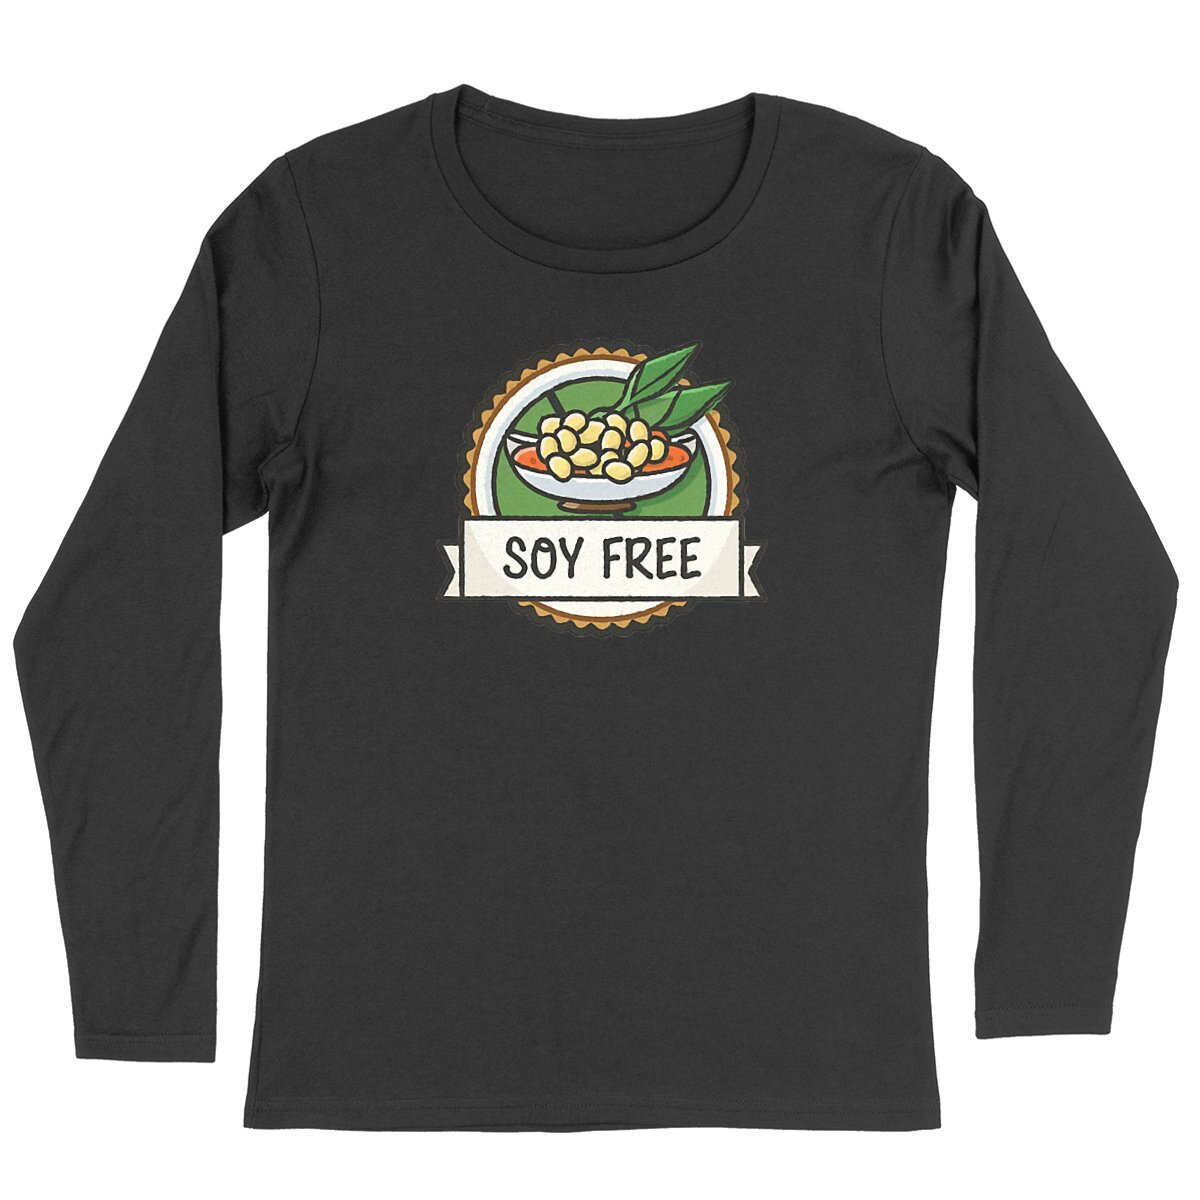 Soy Free Bowl Long Sleeve Organic Cotton Graphic Shirt | Hypoallergenic - Allergy Friendly - Naturally Free